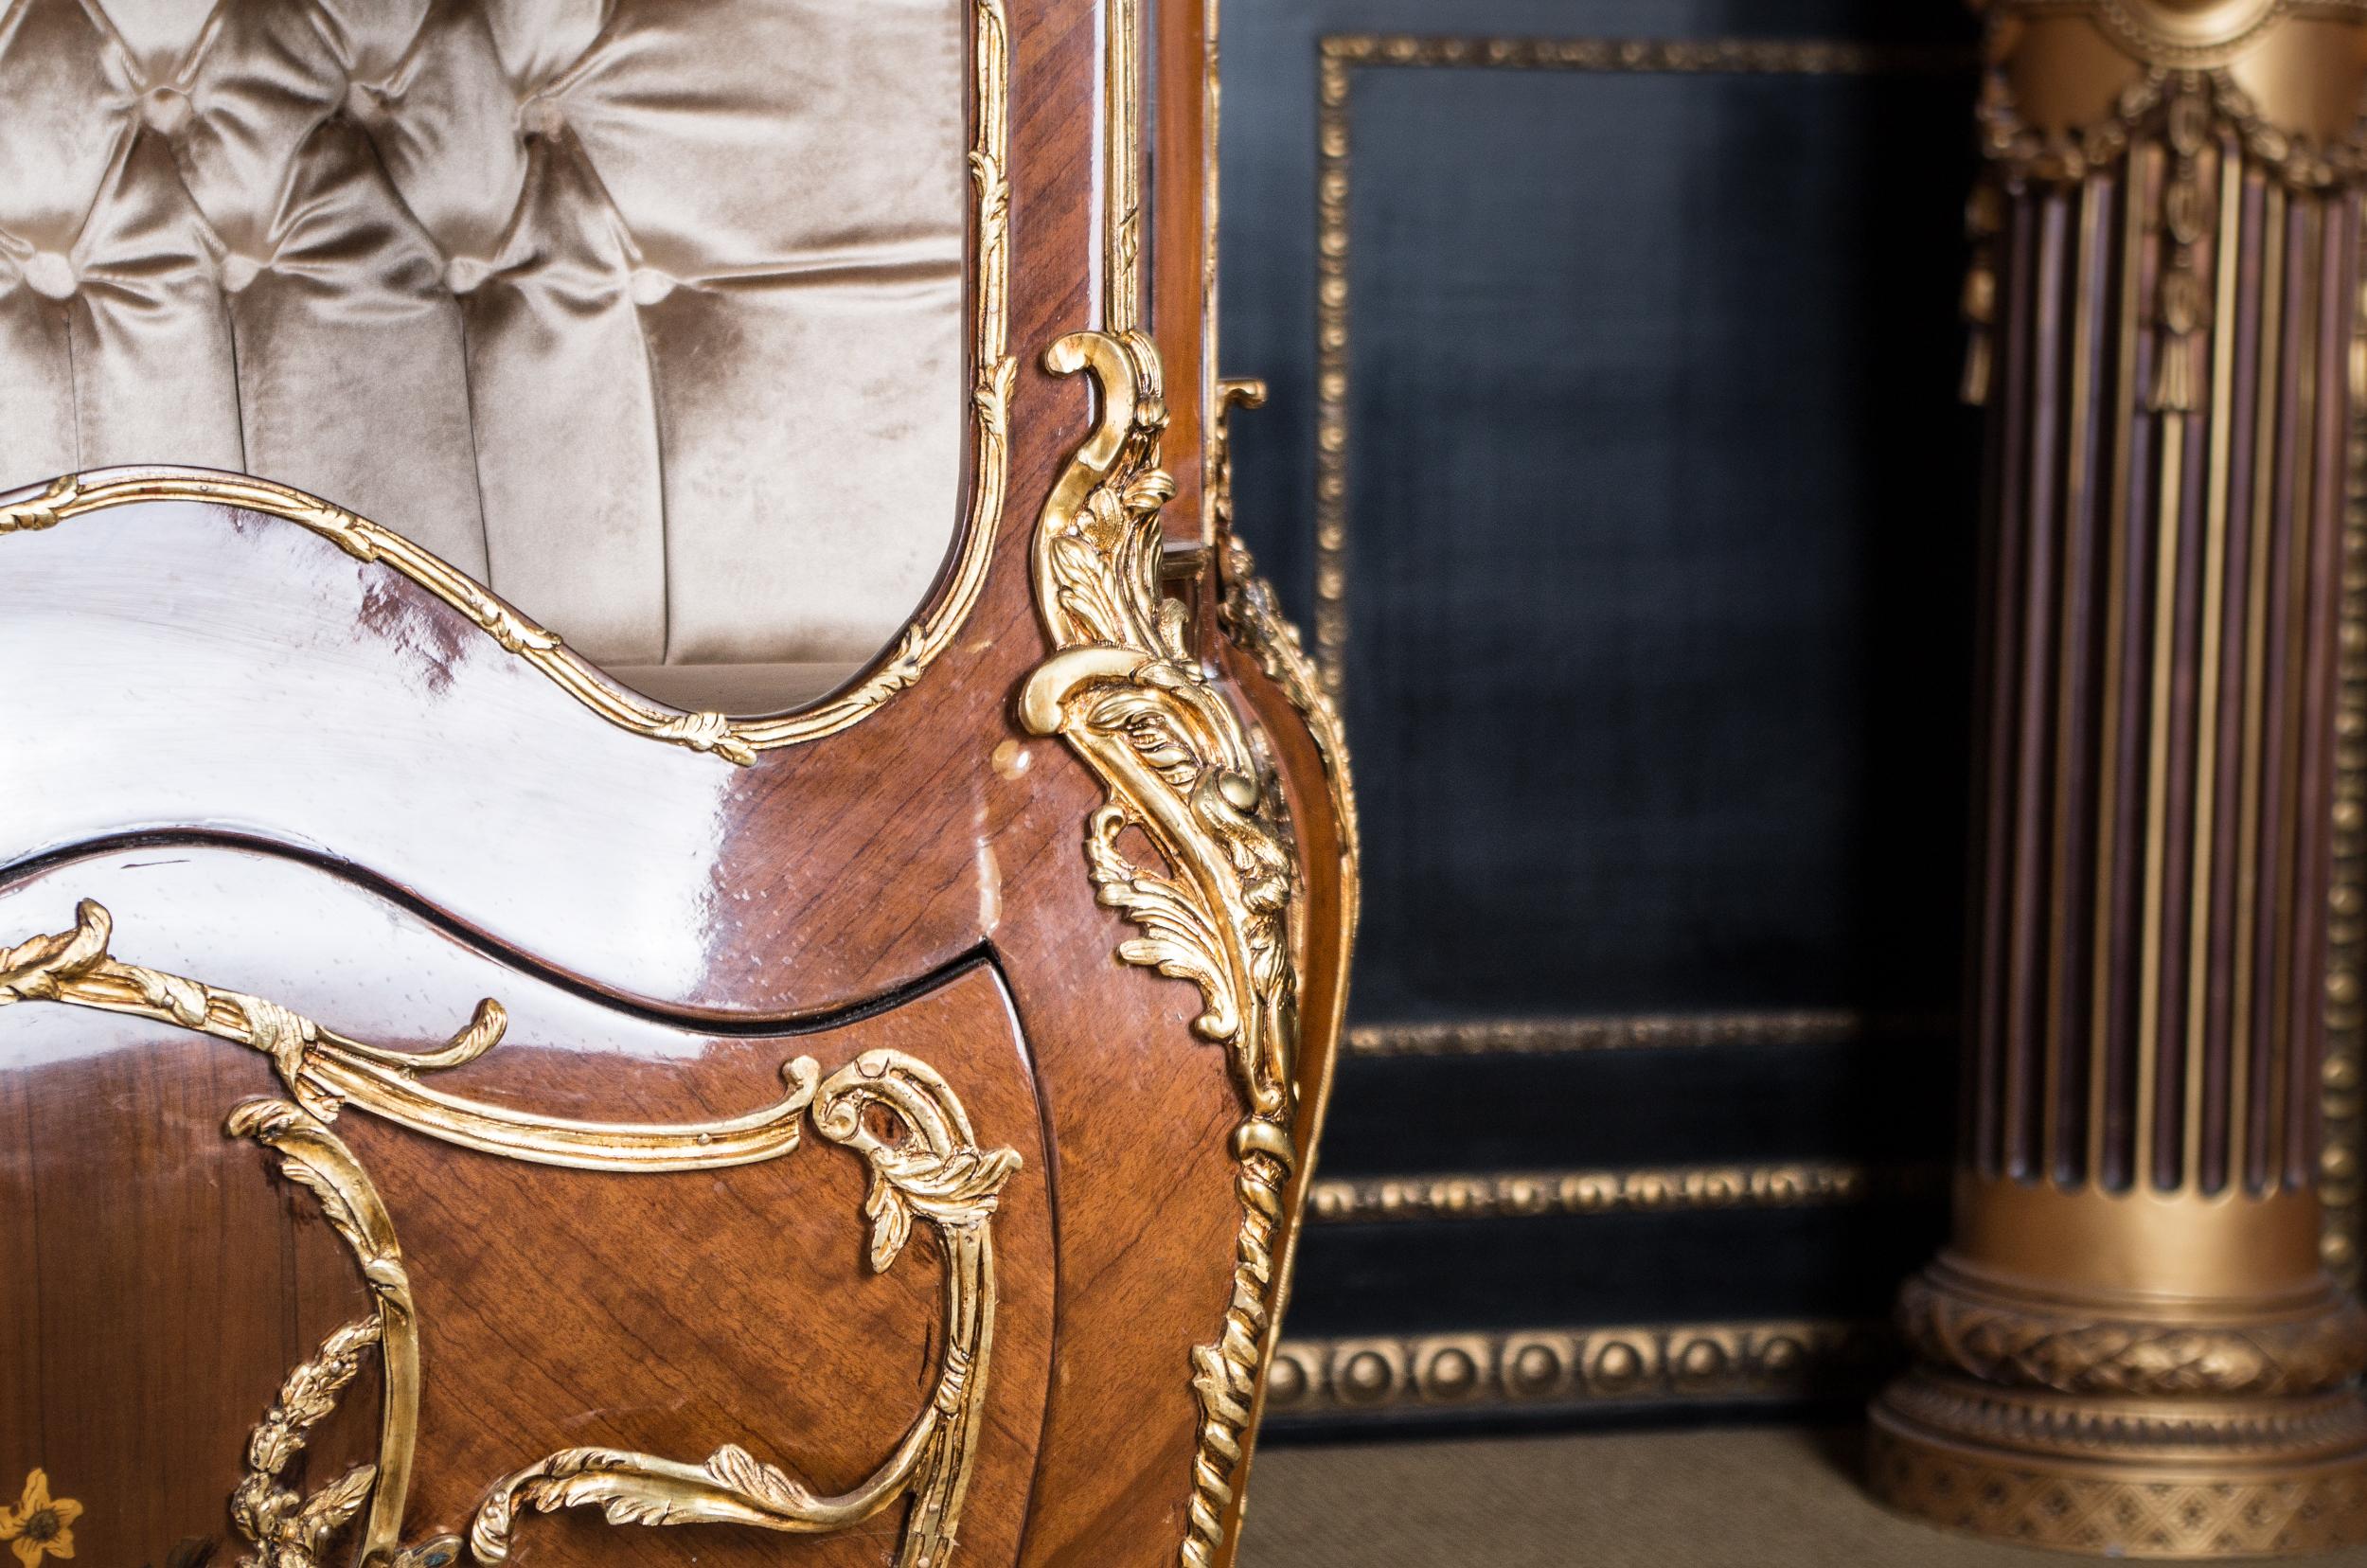 Majestic French Display Case in the Style of the 18th Century, Louis Quinze 2